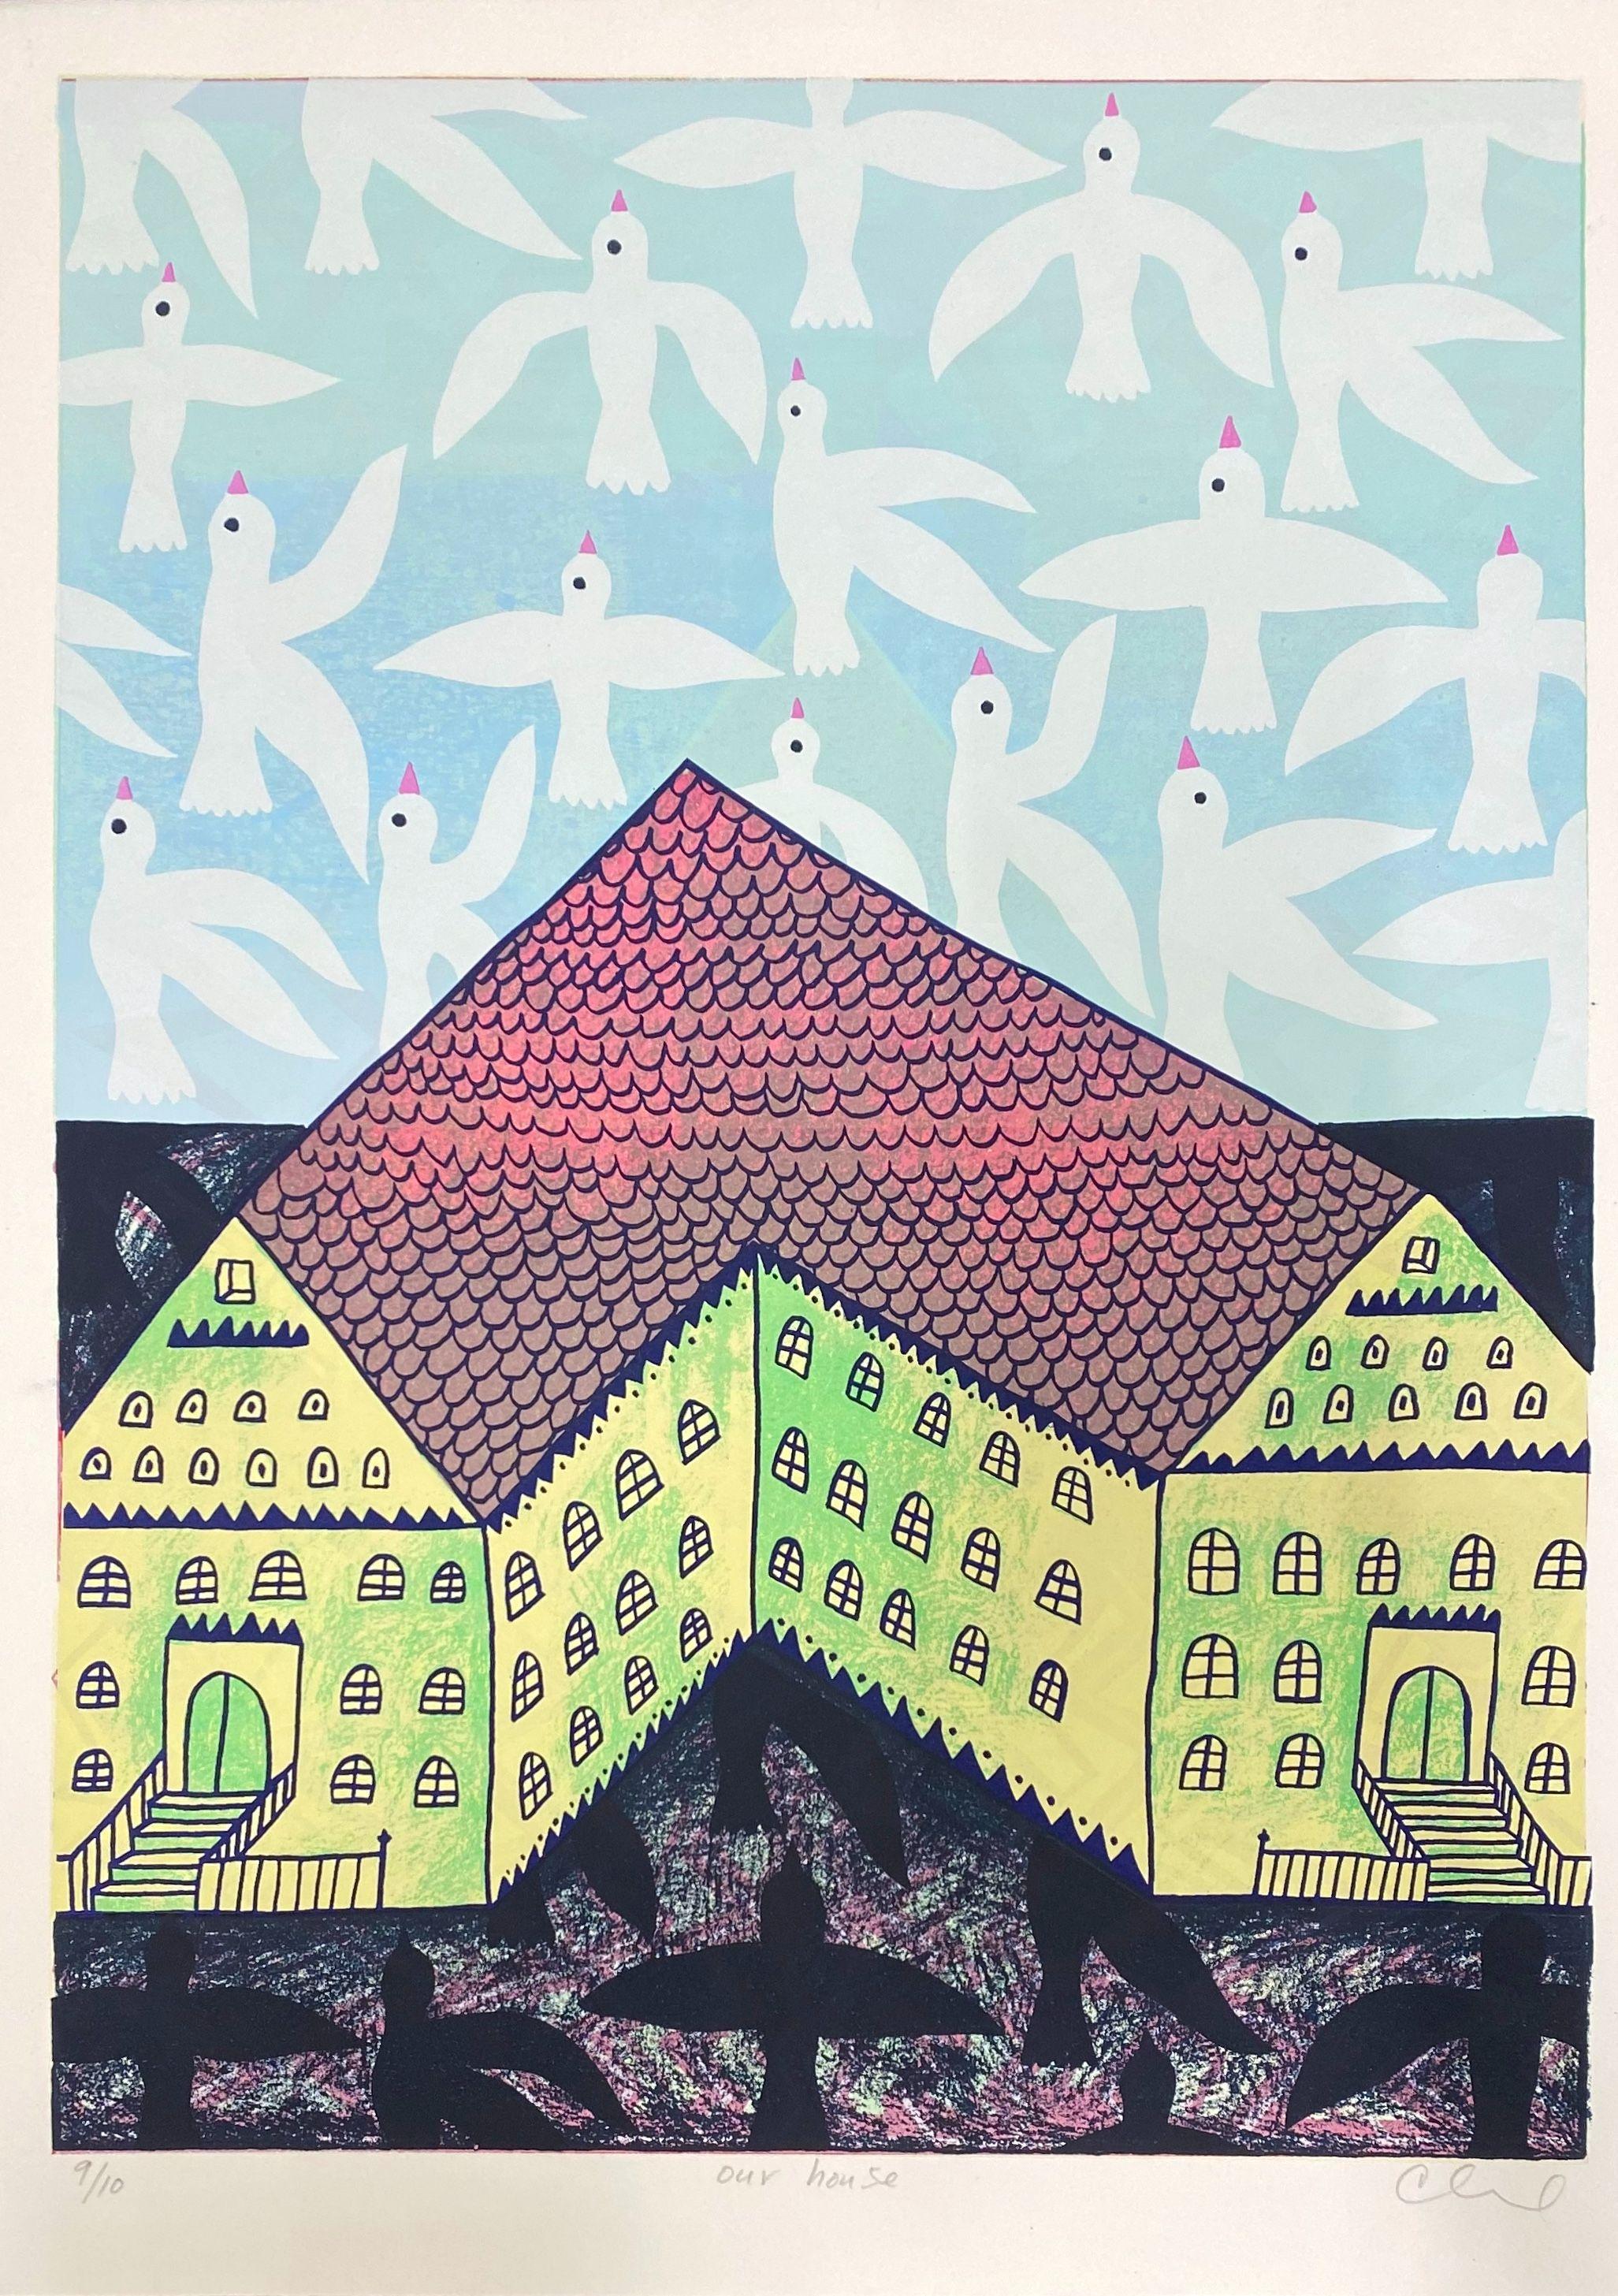 Chadwick Tolley Abstract Print - Our House (4/10)